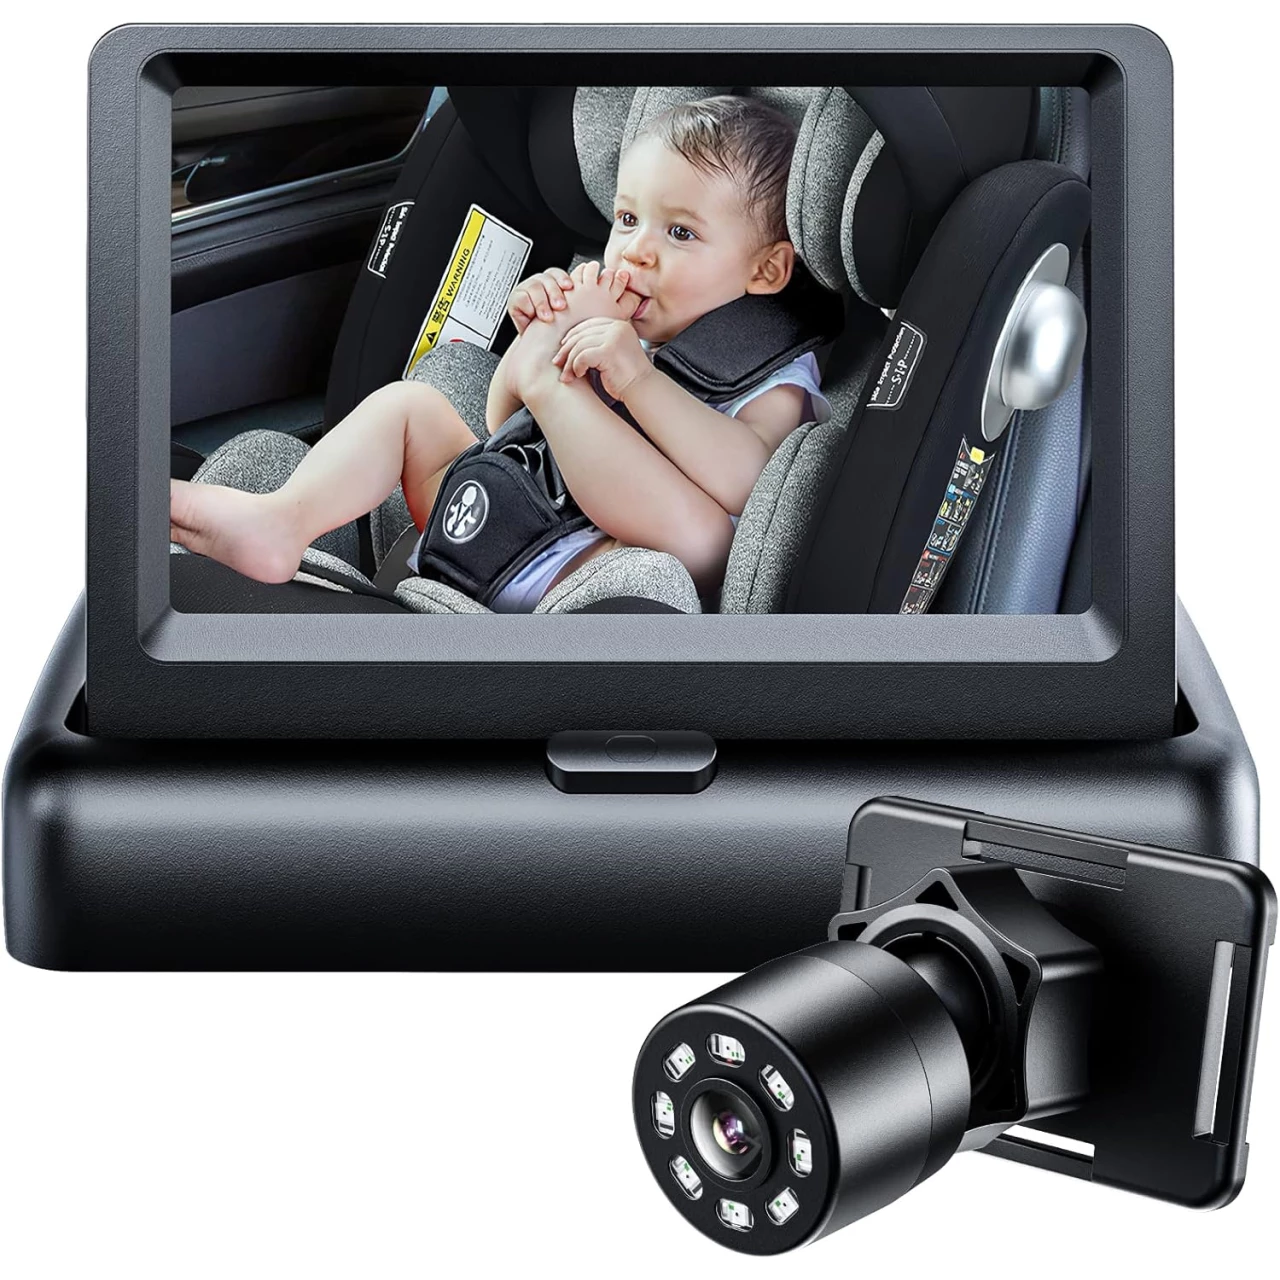 Itomoro Baby Car Mirror, View Infant in Rear Facing Seat with Wide Crystal Clear View